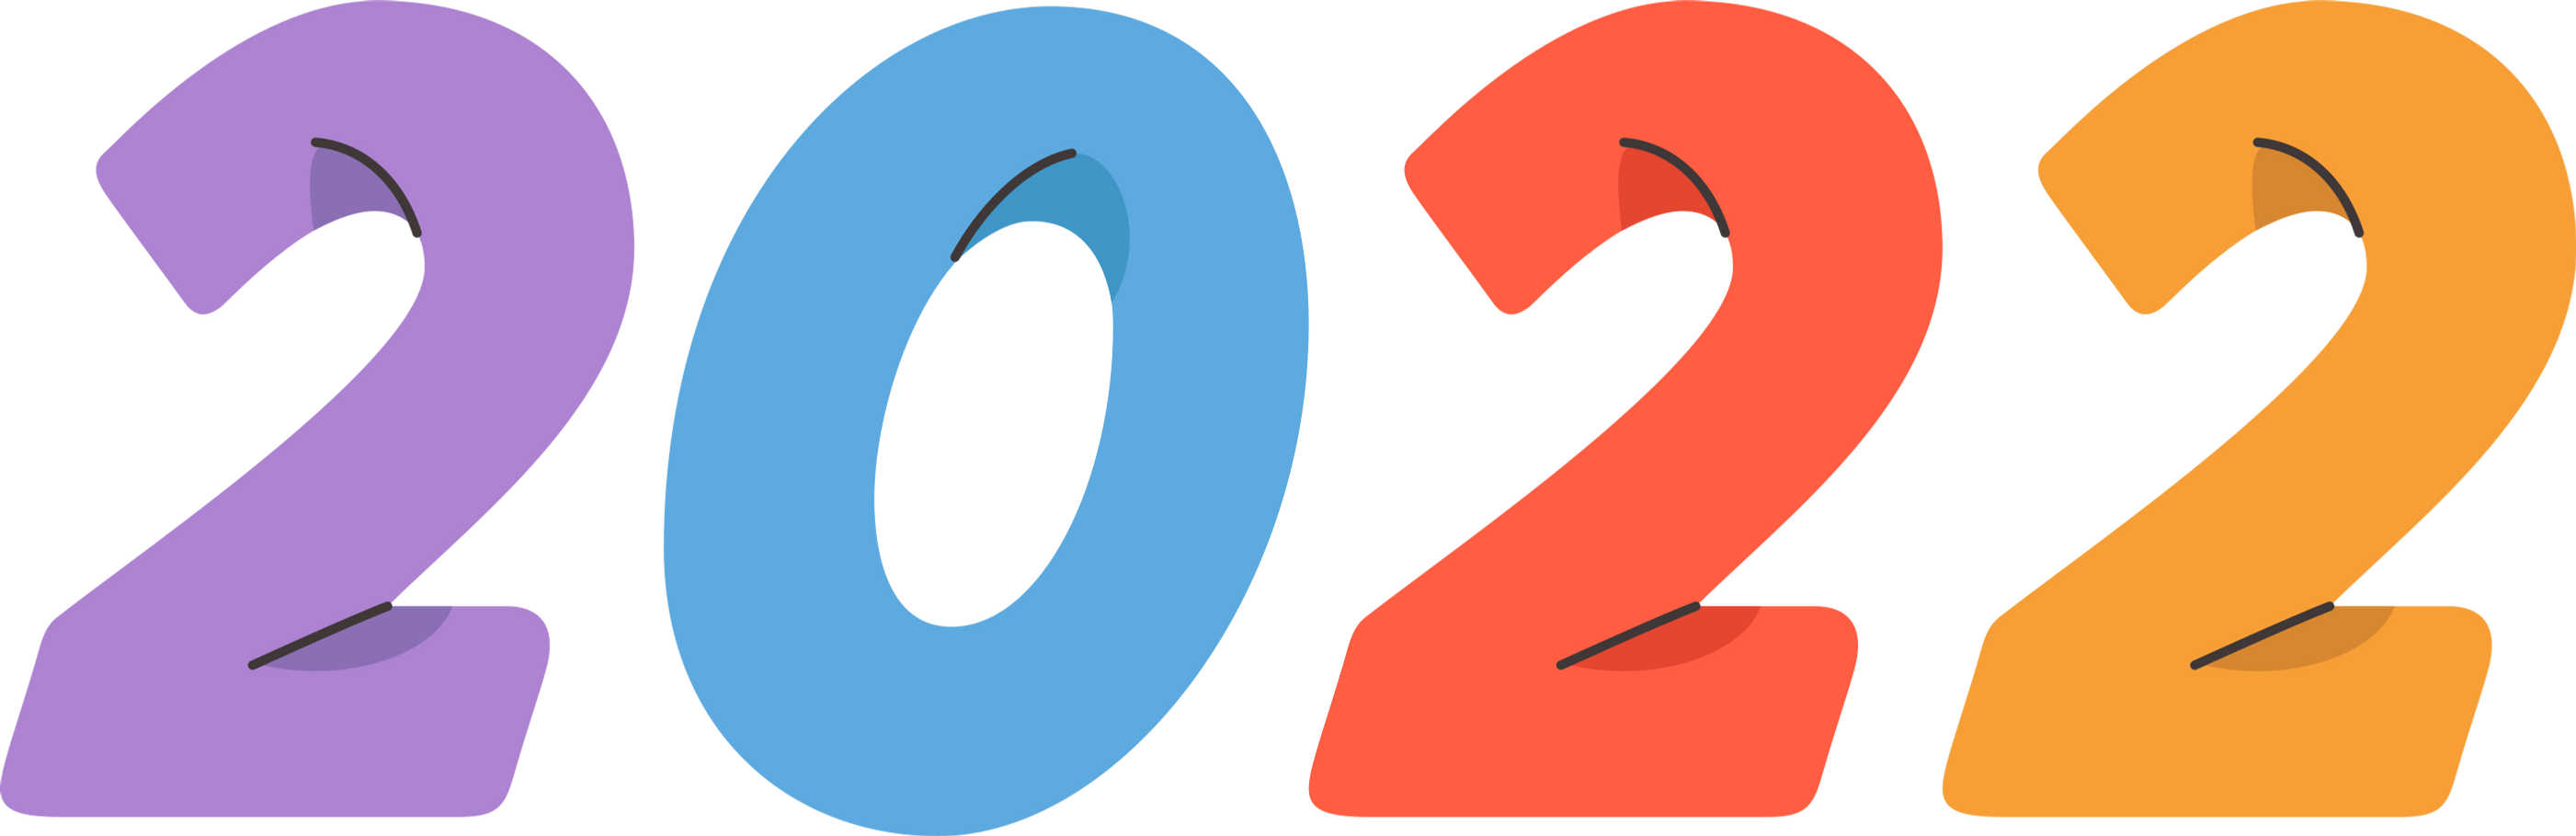 two thousand twenty-two years Illustration in PNG, SVG